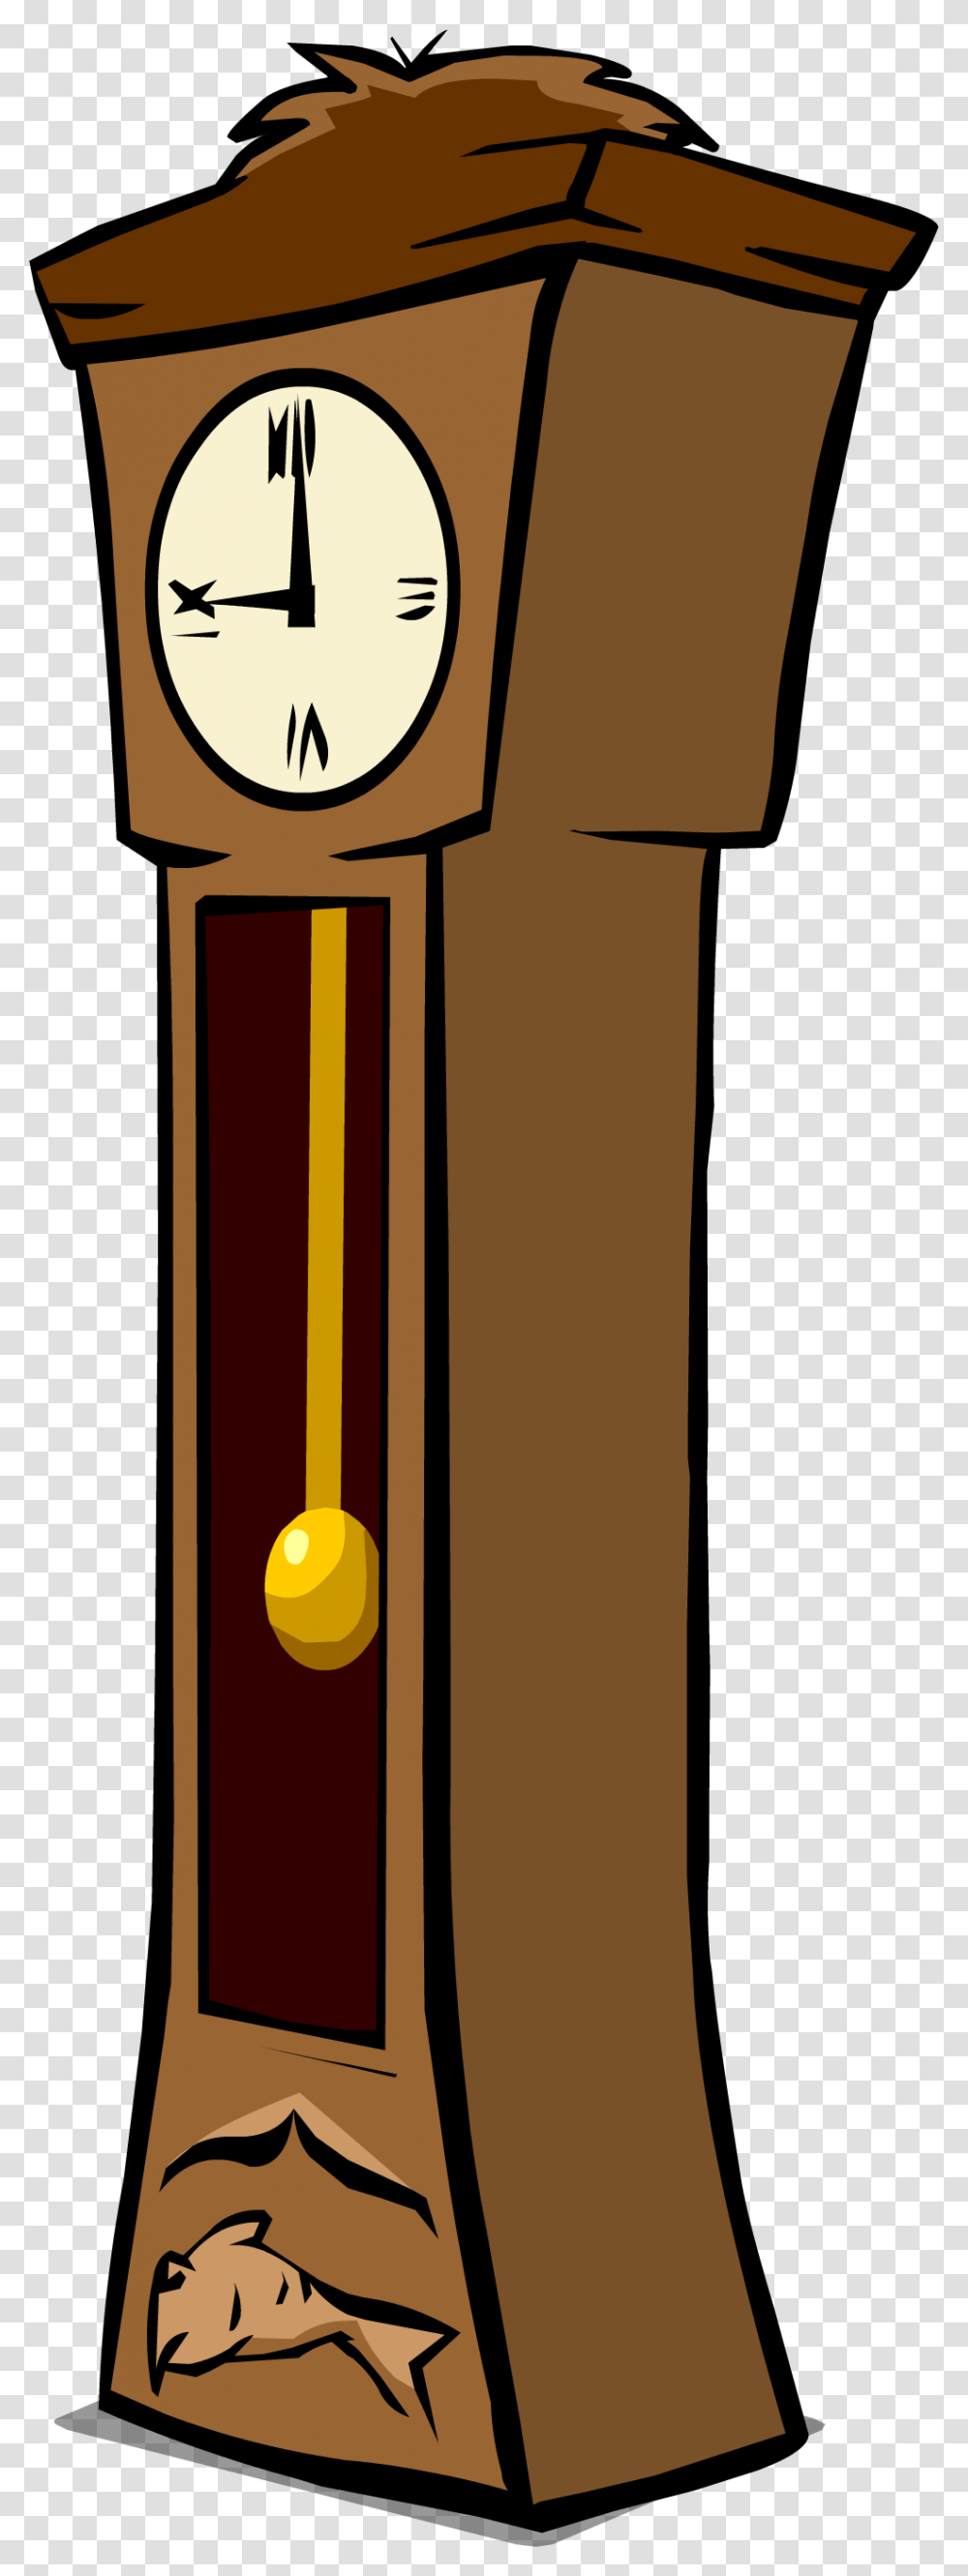 Grandfather Clock Clipart At Getdrawings Grandfather Clock Clipart, Apparel, Long Sleeve Transparent Png